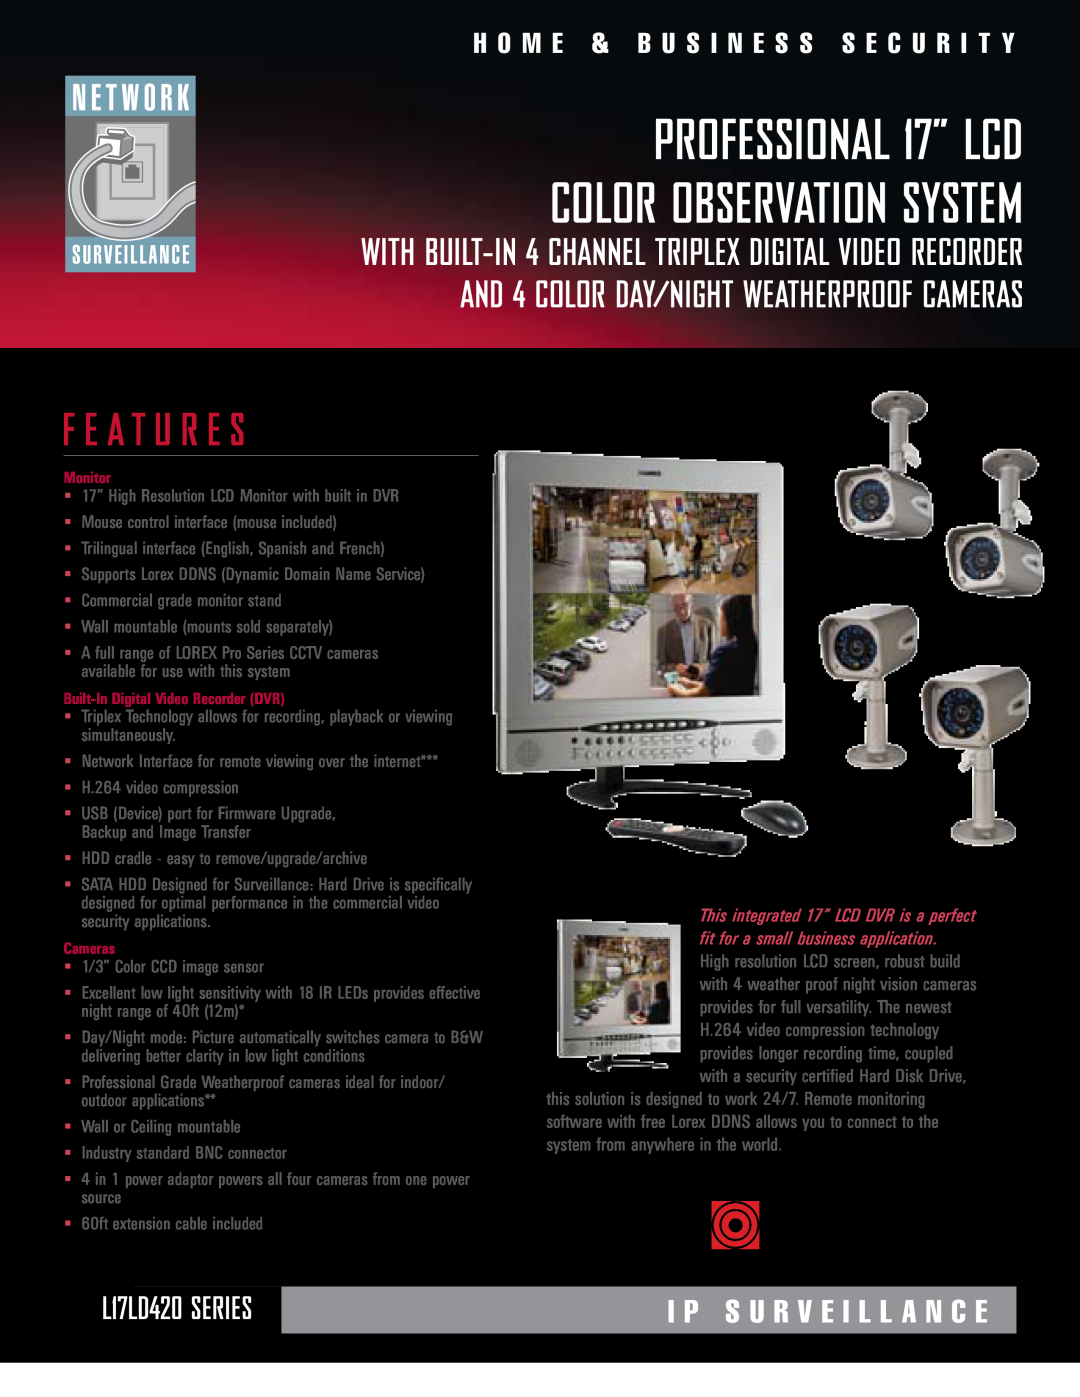 LOREX Technology manual PROFESSIONAL 17” LCD COLOR OBSERVATION SYSTEM, F E A T U R E S, L17LD420 Series 